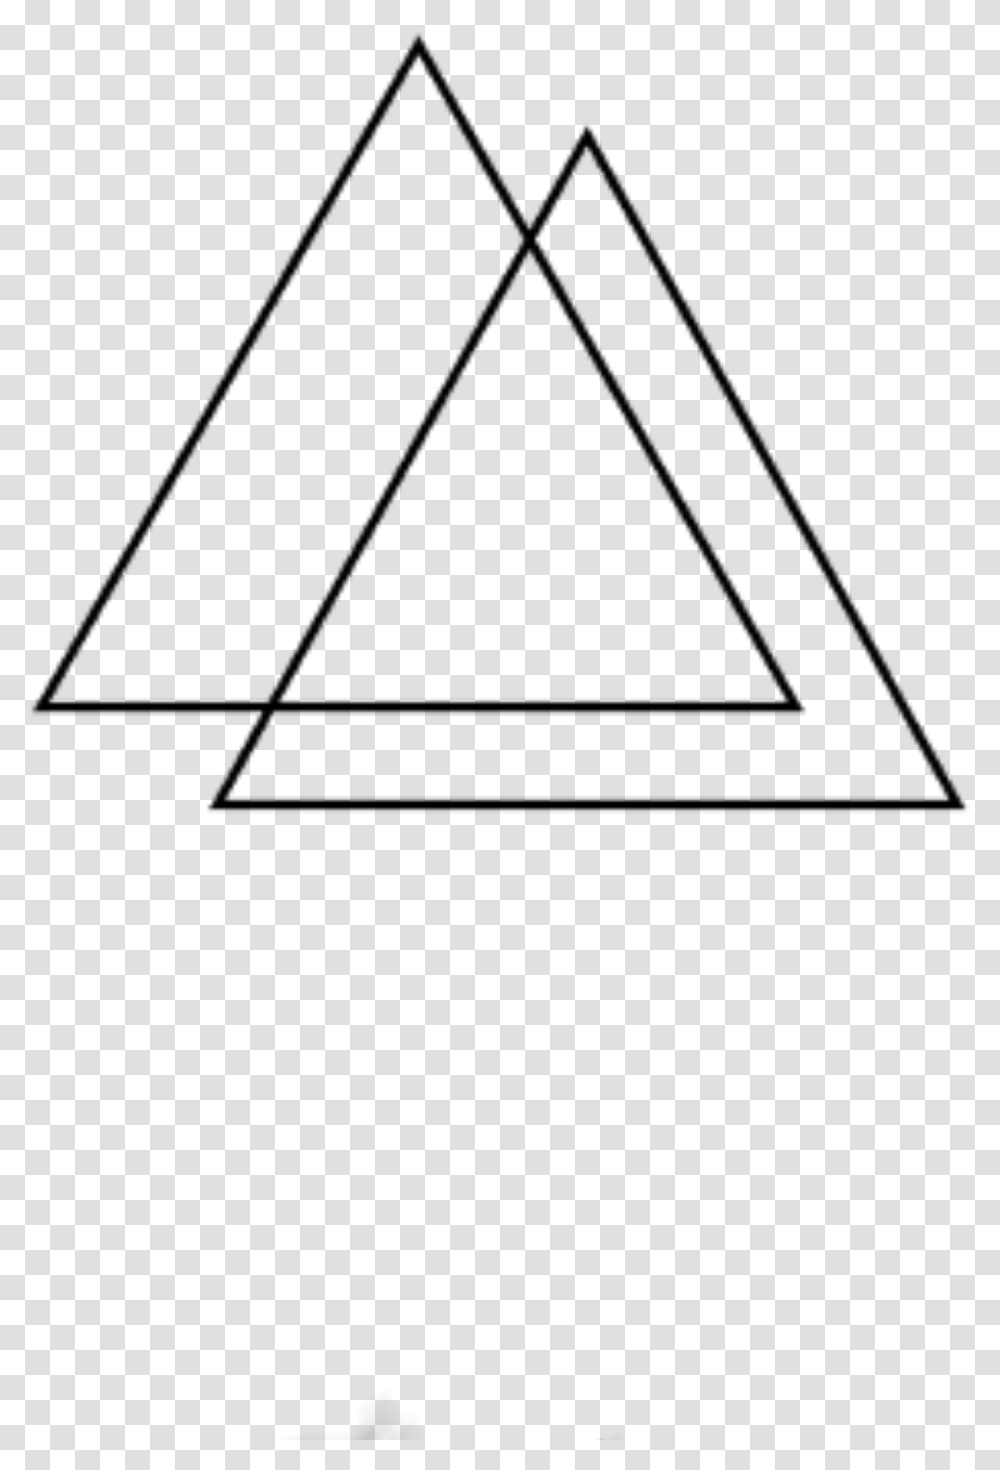 Triangle Tumblr Aesthetic Remixit Triangles Aesthetic Triangle Transparent Png